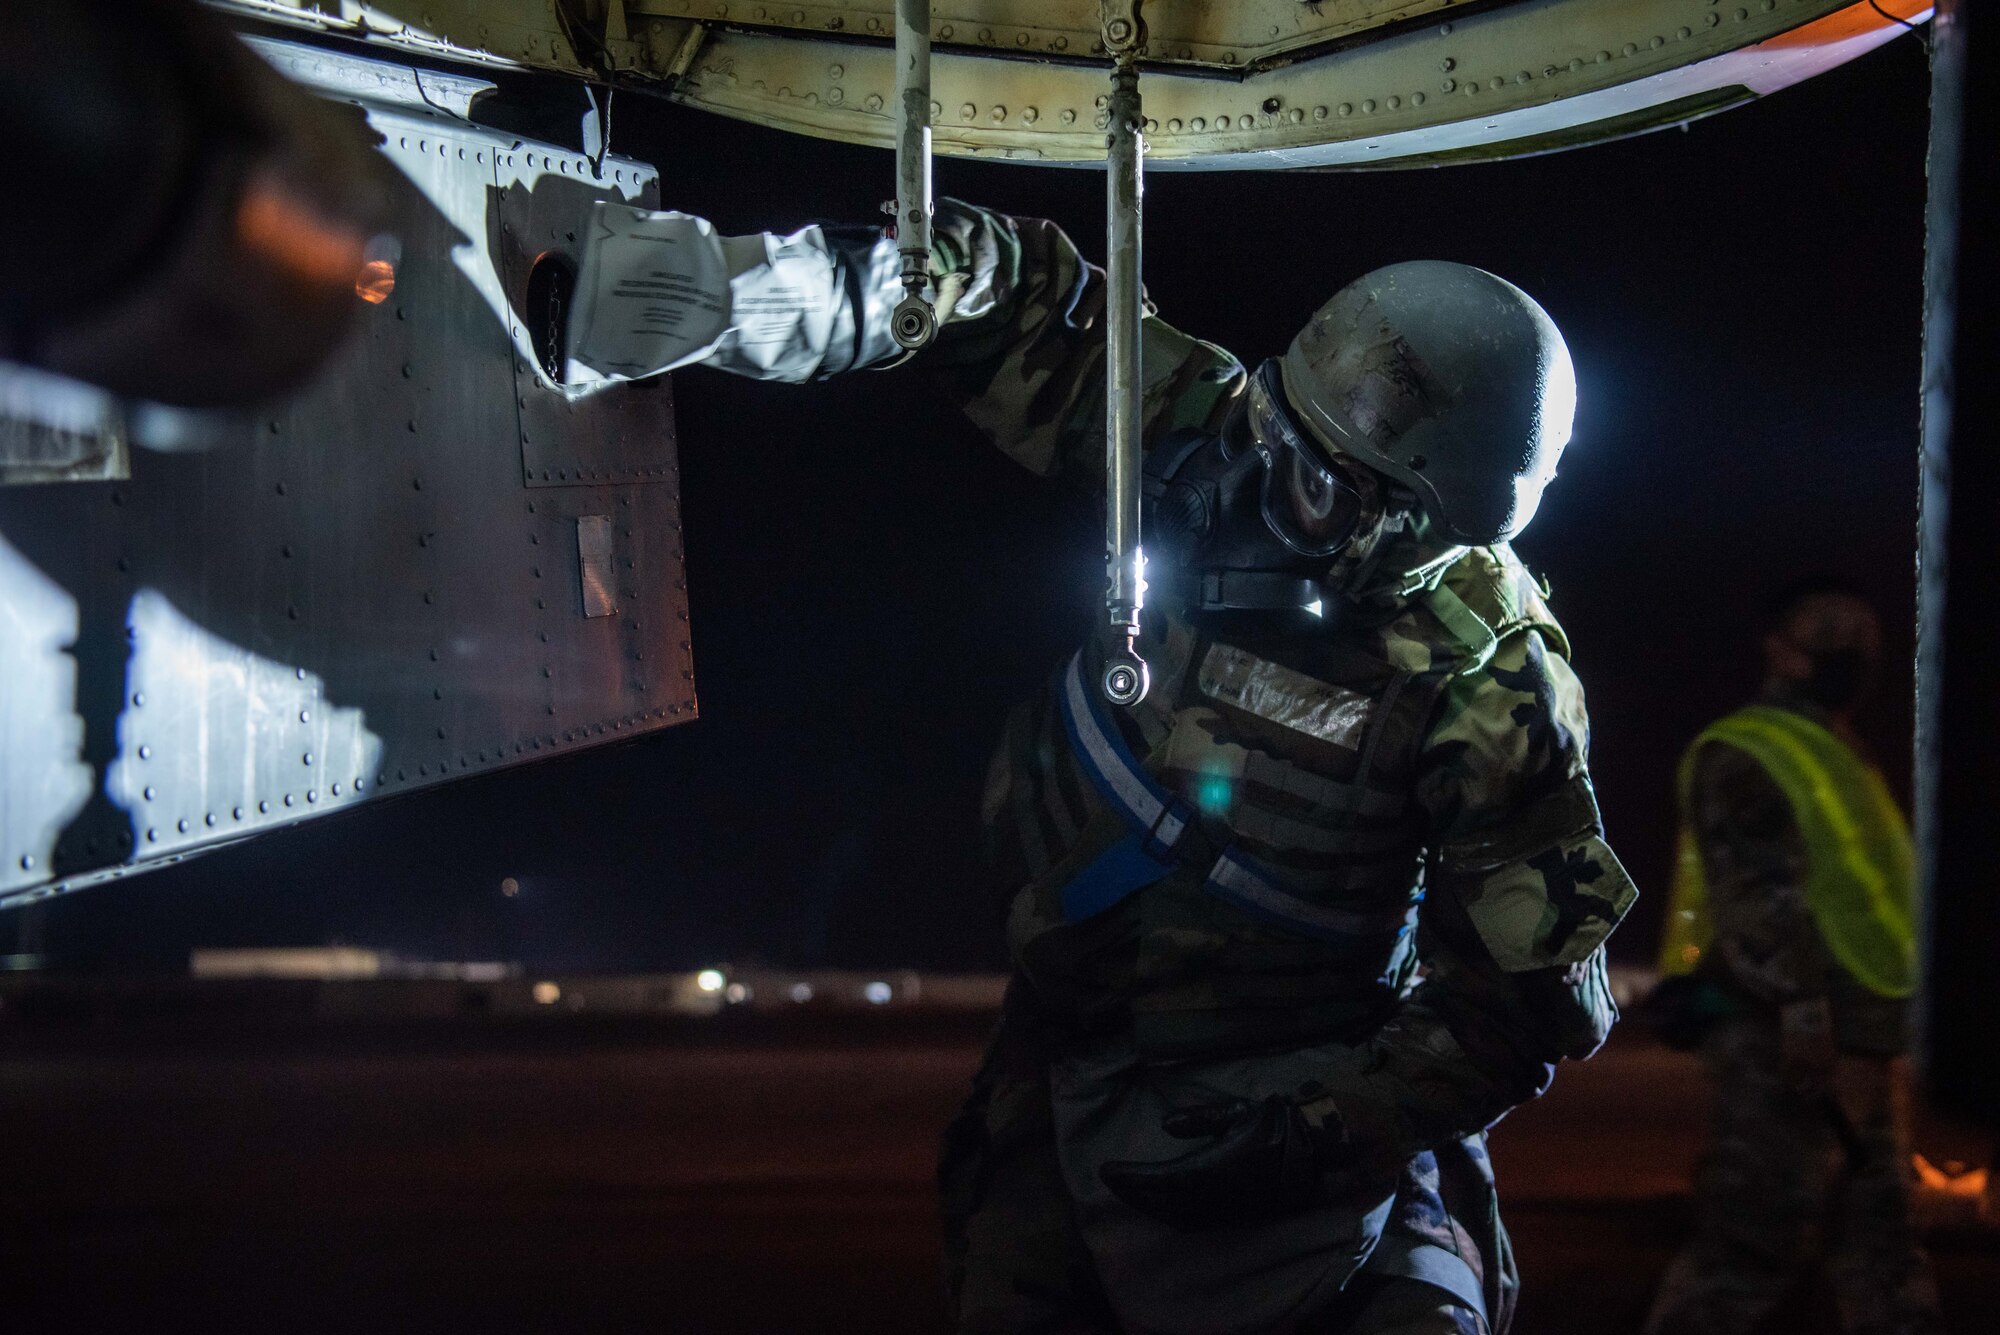 An Airman in protective gear simulates decontaminating a KC-135 Stratotanker.